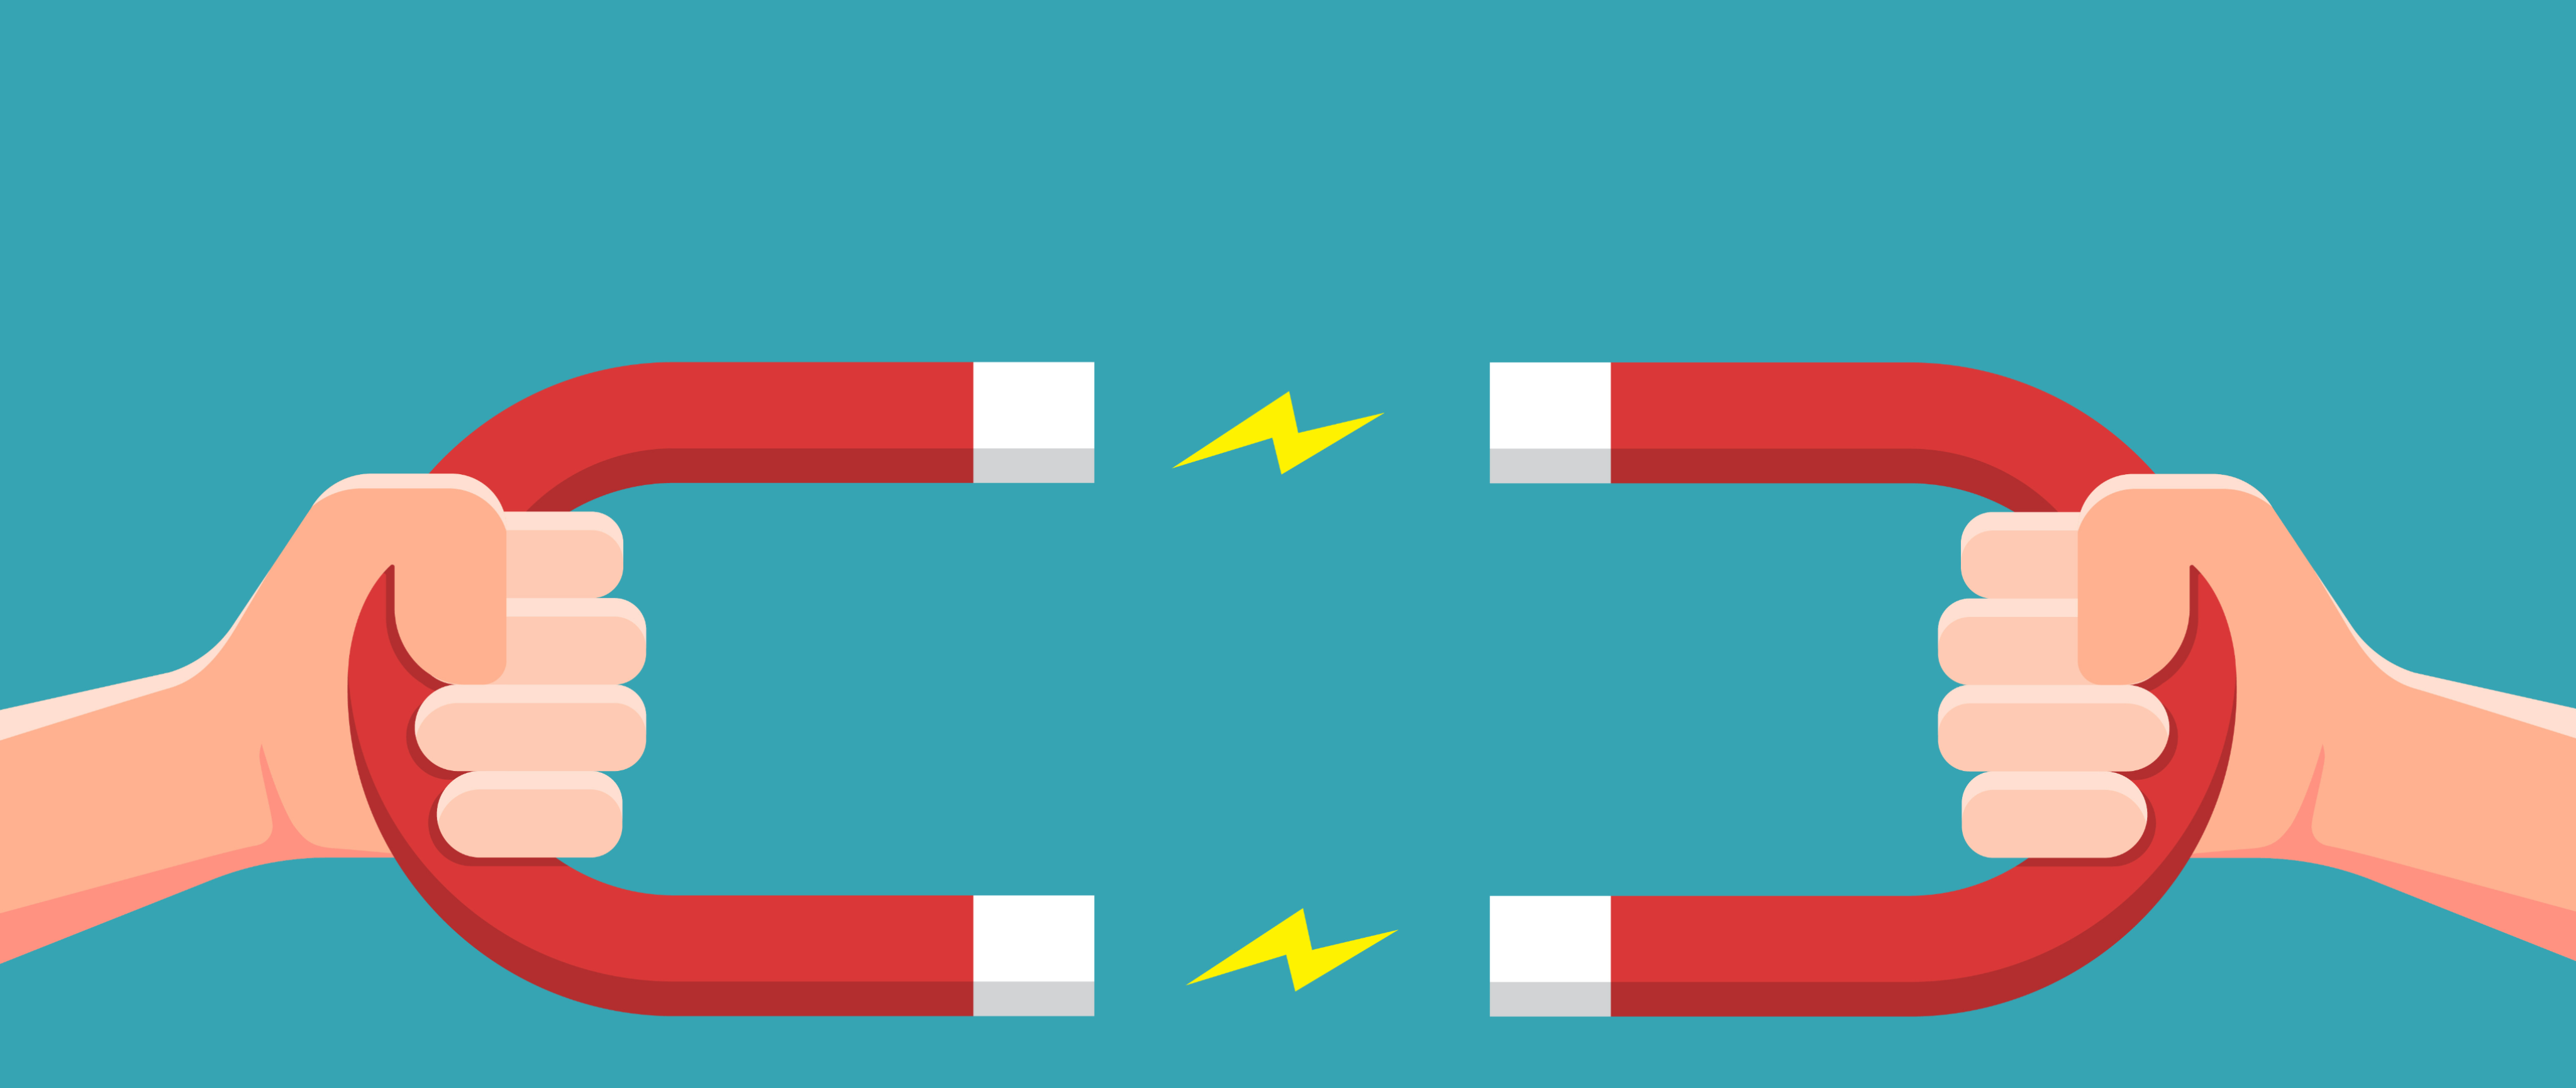 Physics: Magnetic Force: Level 1 activity for kids | PrimaryLeap.co.uk